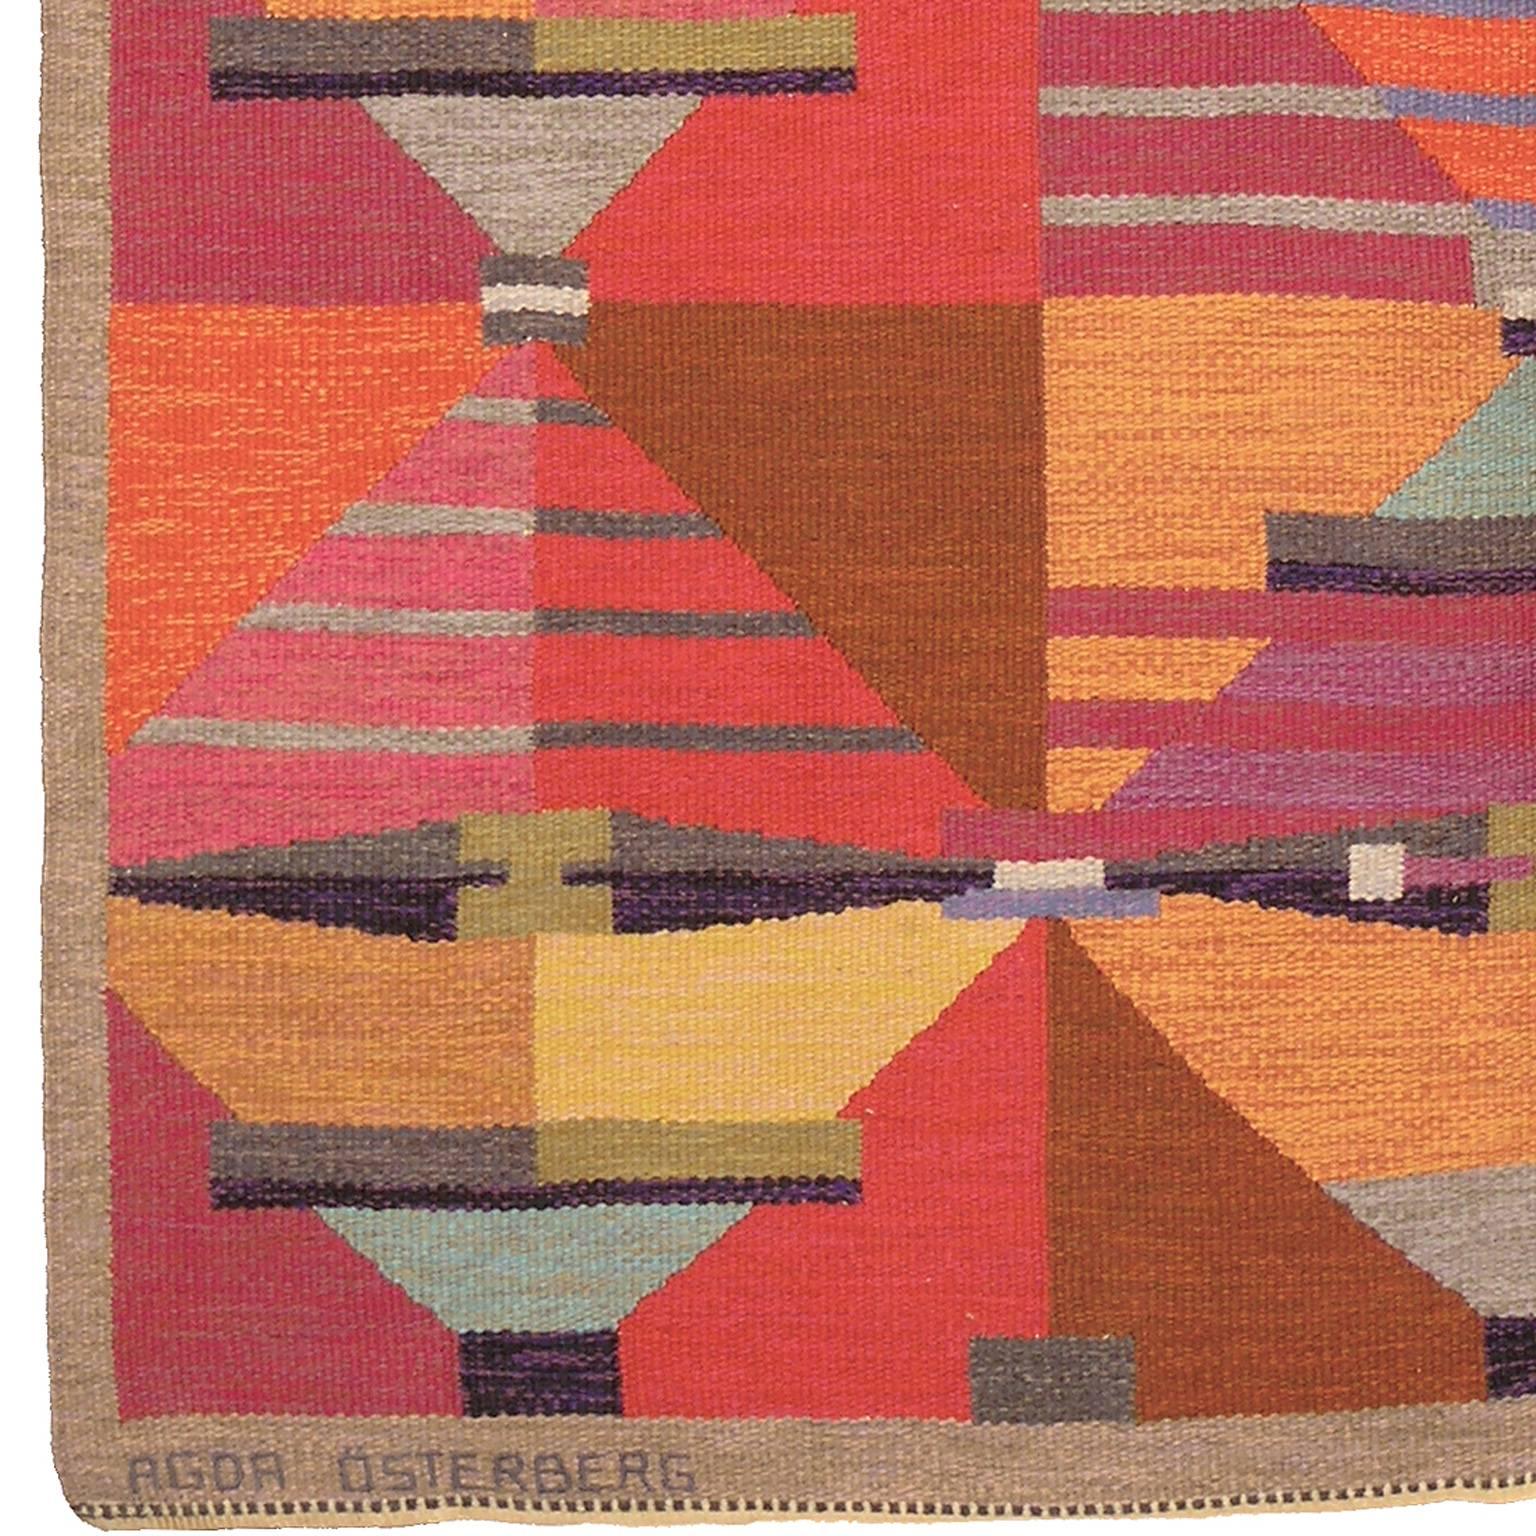 Swedish flat-weave Carpet by Agda Osterberg, 1960
Sweden, circa 1960
Handwoven
Signed “Agda Osterberg” and with the initials “A.O.”

 